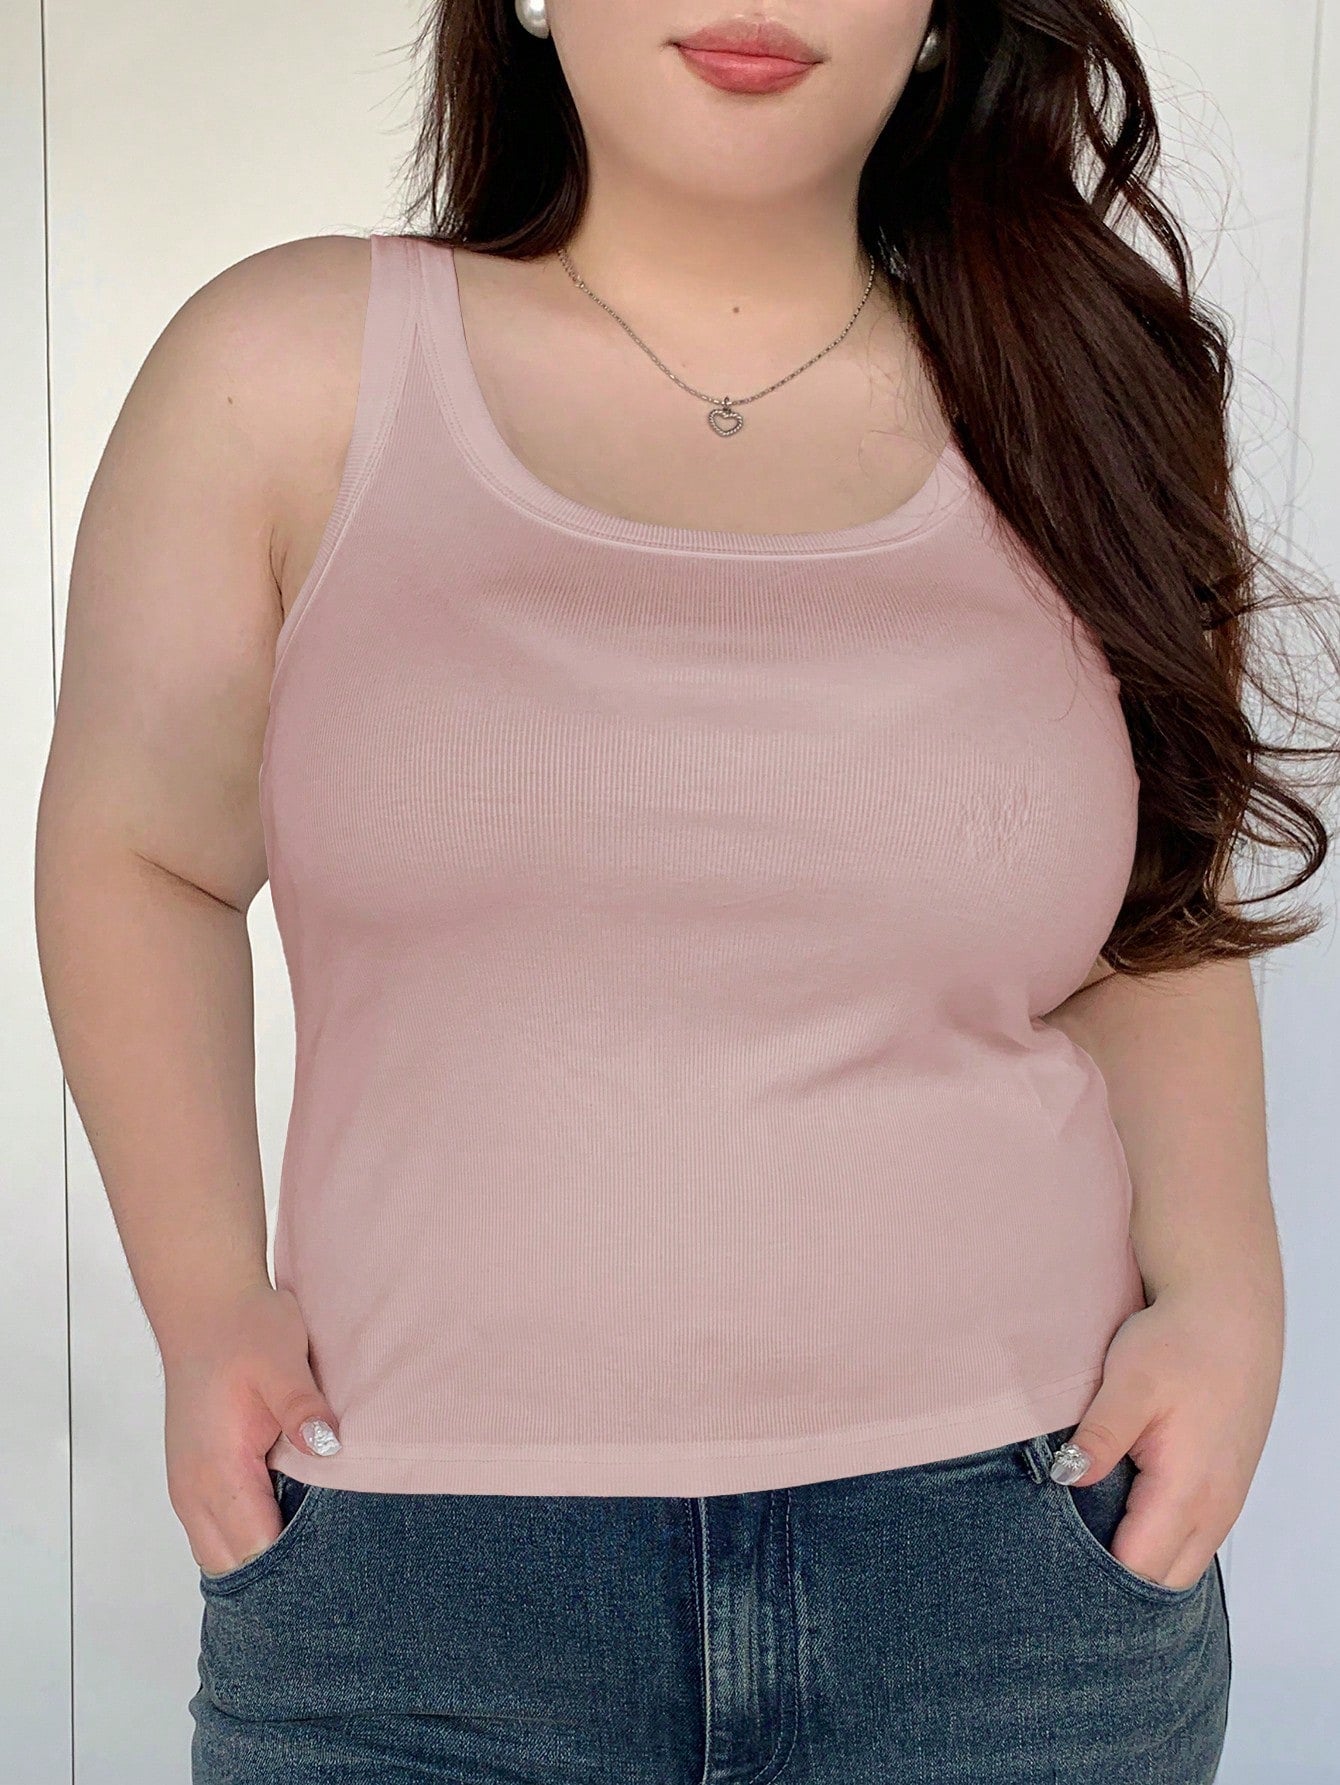 Plus Size Women's Fashionable Slim Fit Solid Color Tank Top For Summer